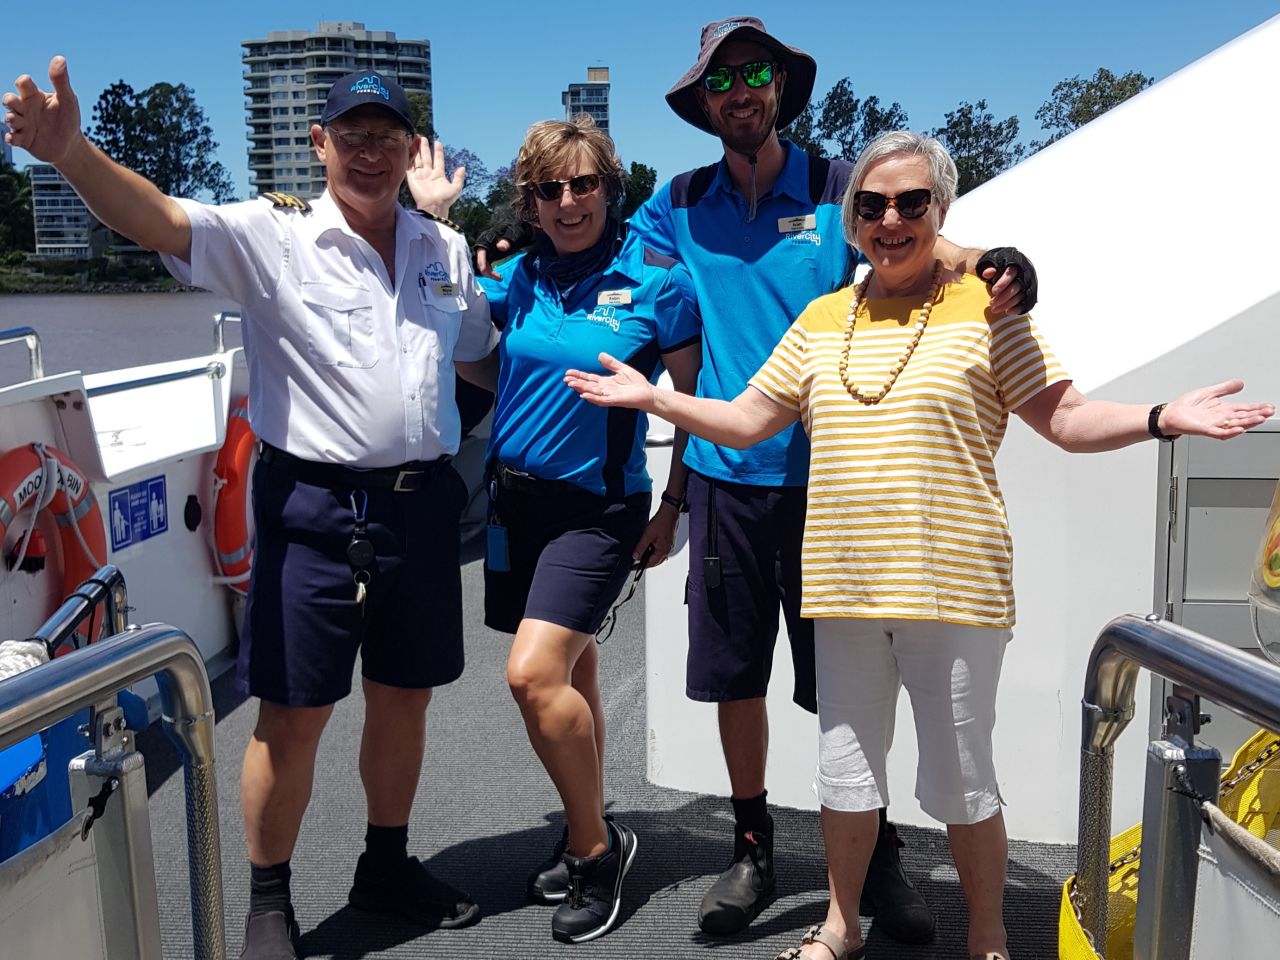 A fabulous CityCat Ride. In excellent hands with Skipper Wayne, Customer Service Officer, Robin and Deckhand Ivan.
“This project kindly supported by the Lord Mayor’s Community Fund and Central Ward Councillor”